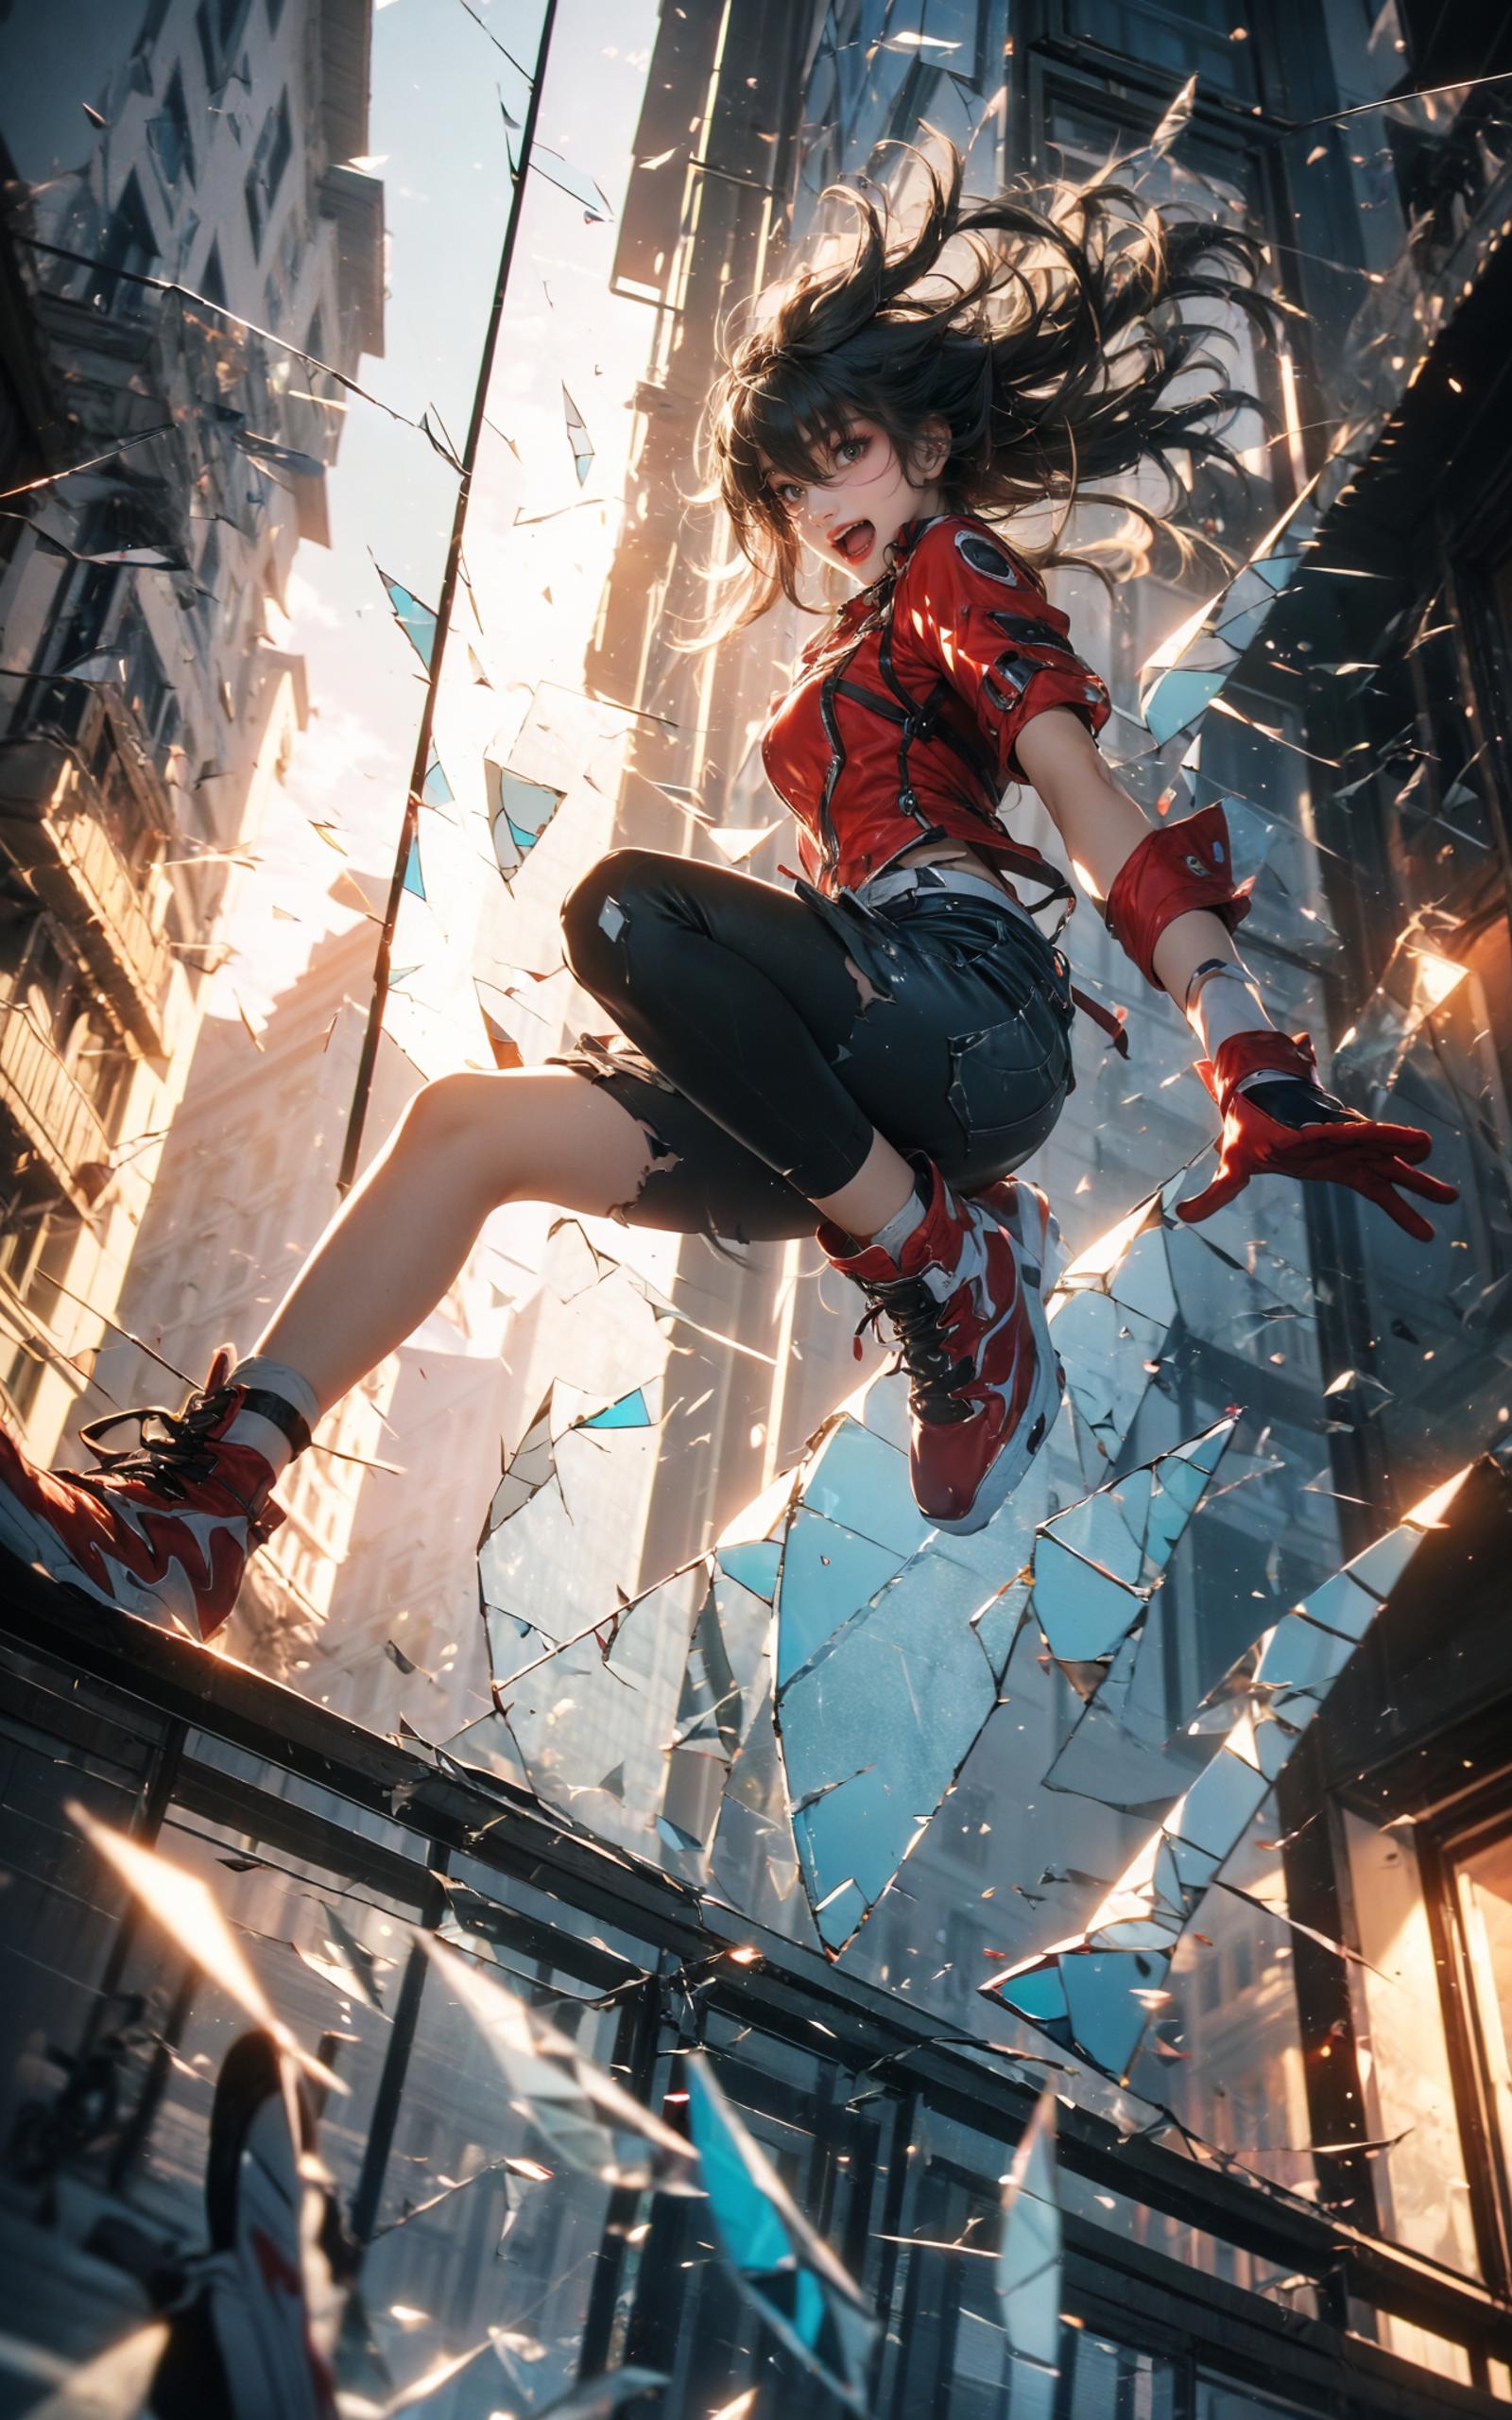 Anime-style female character with red hair and red clothing, jumping on shattered glass.